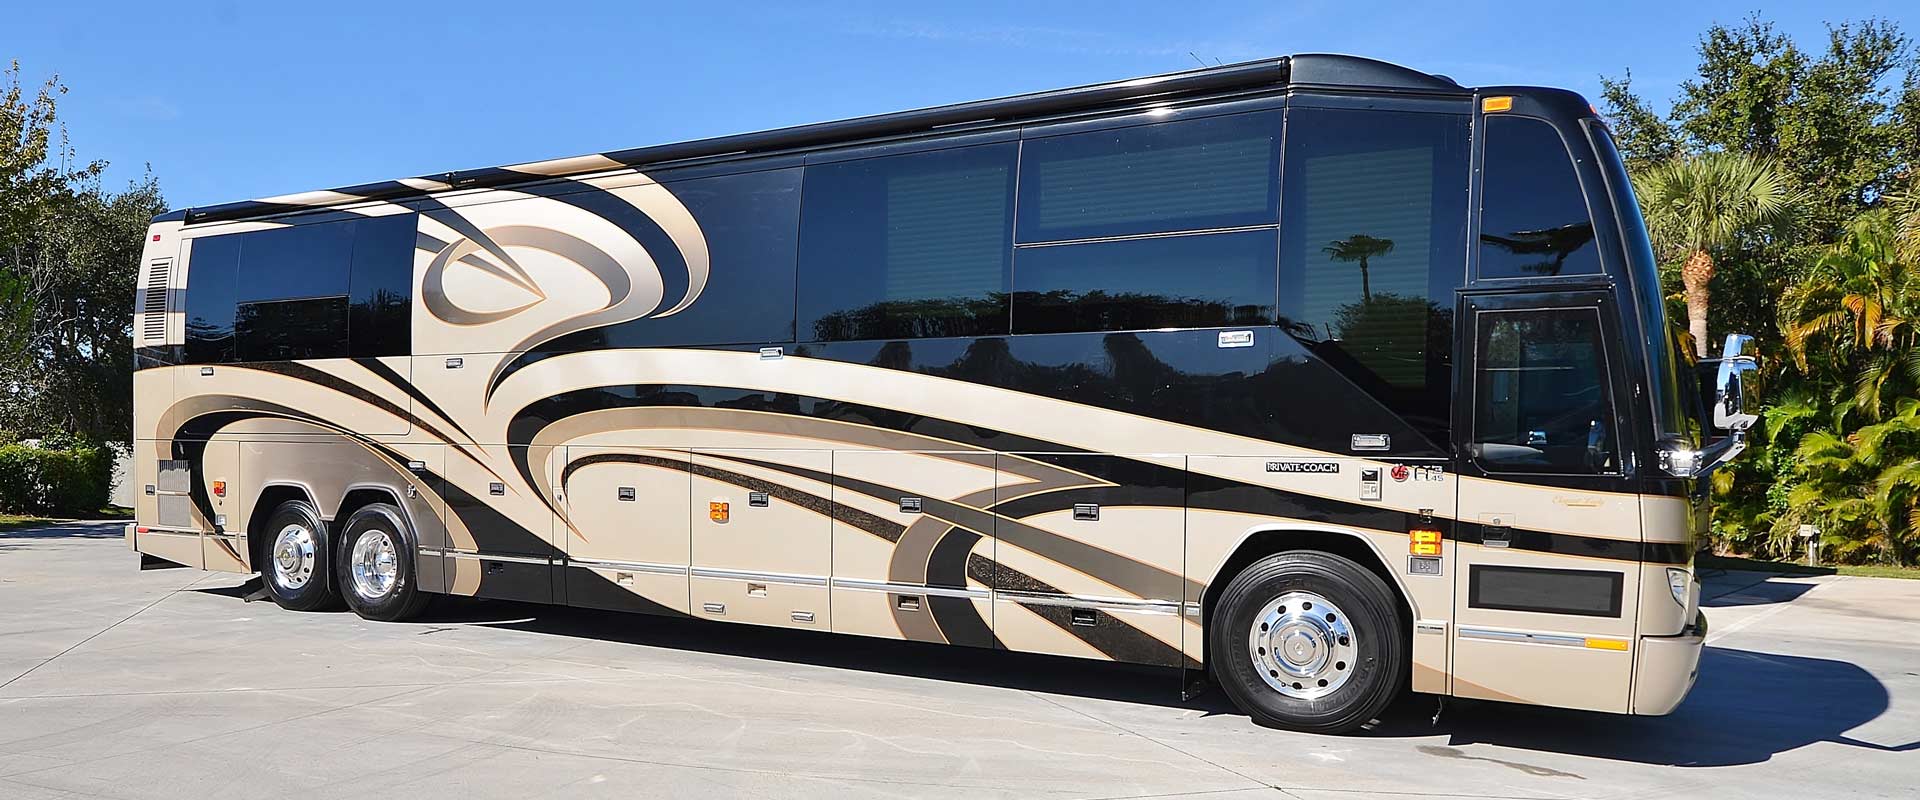 2011 Liberty Coach #M7185 exterior entry side front view of motorcoach on the lot